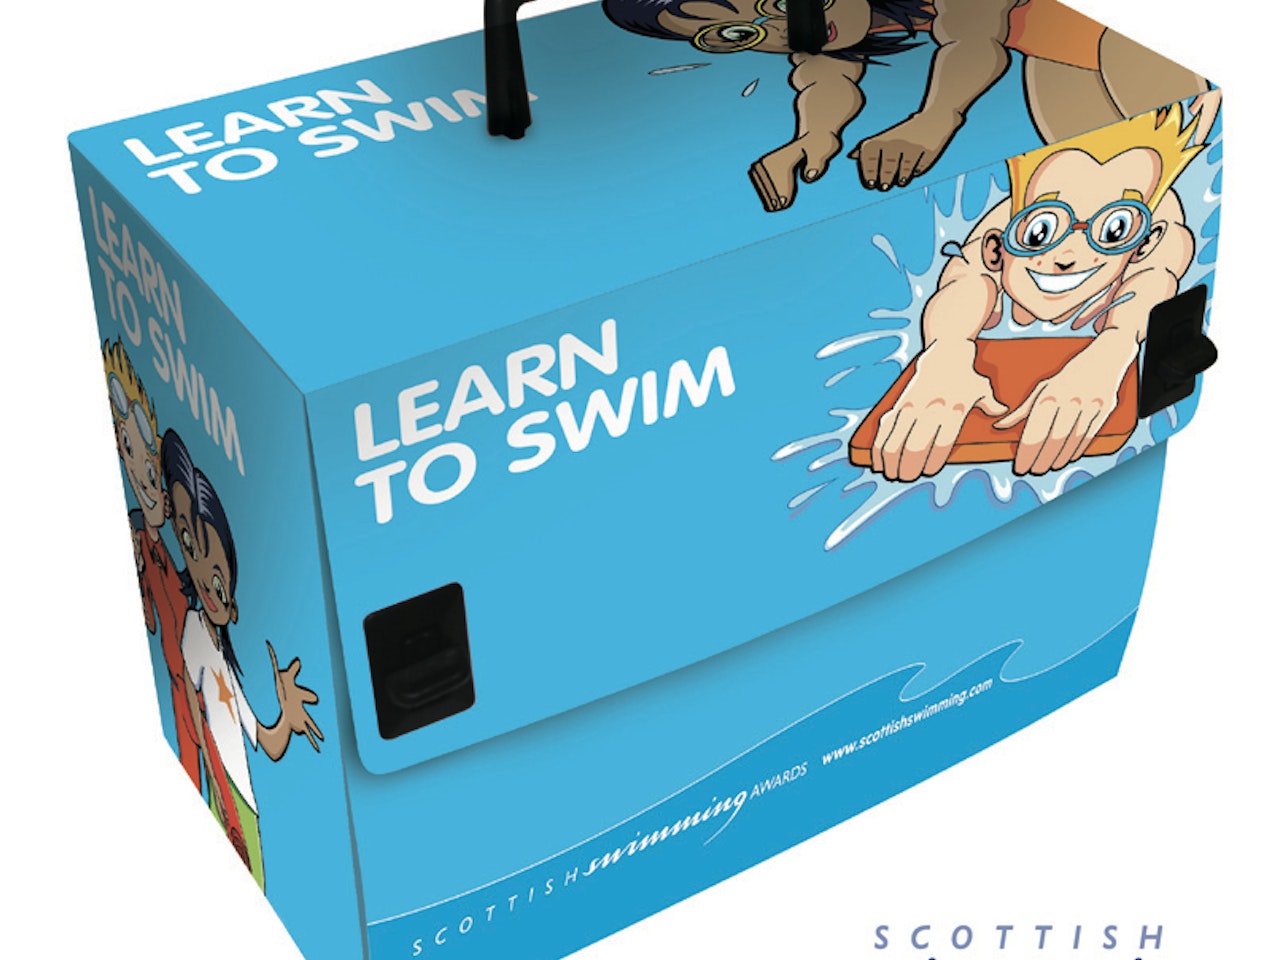 swim swimming boy learn to swim packaging design Cool friendly funny Funky Happy manga anime childrens cartoon comic strip Book cover illustration animation